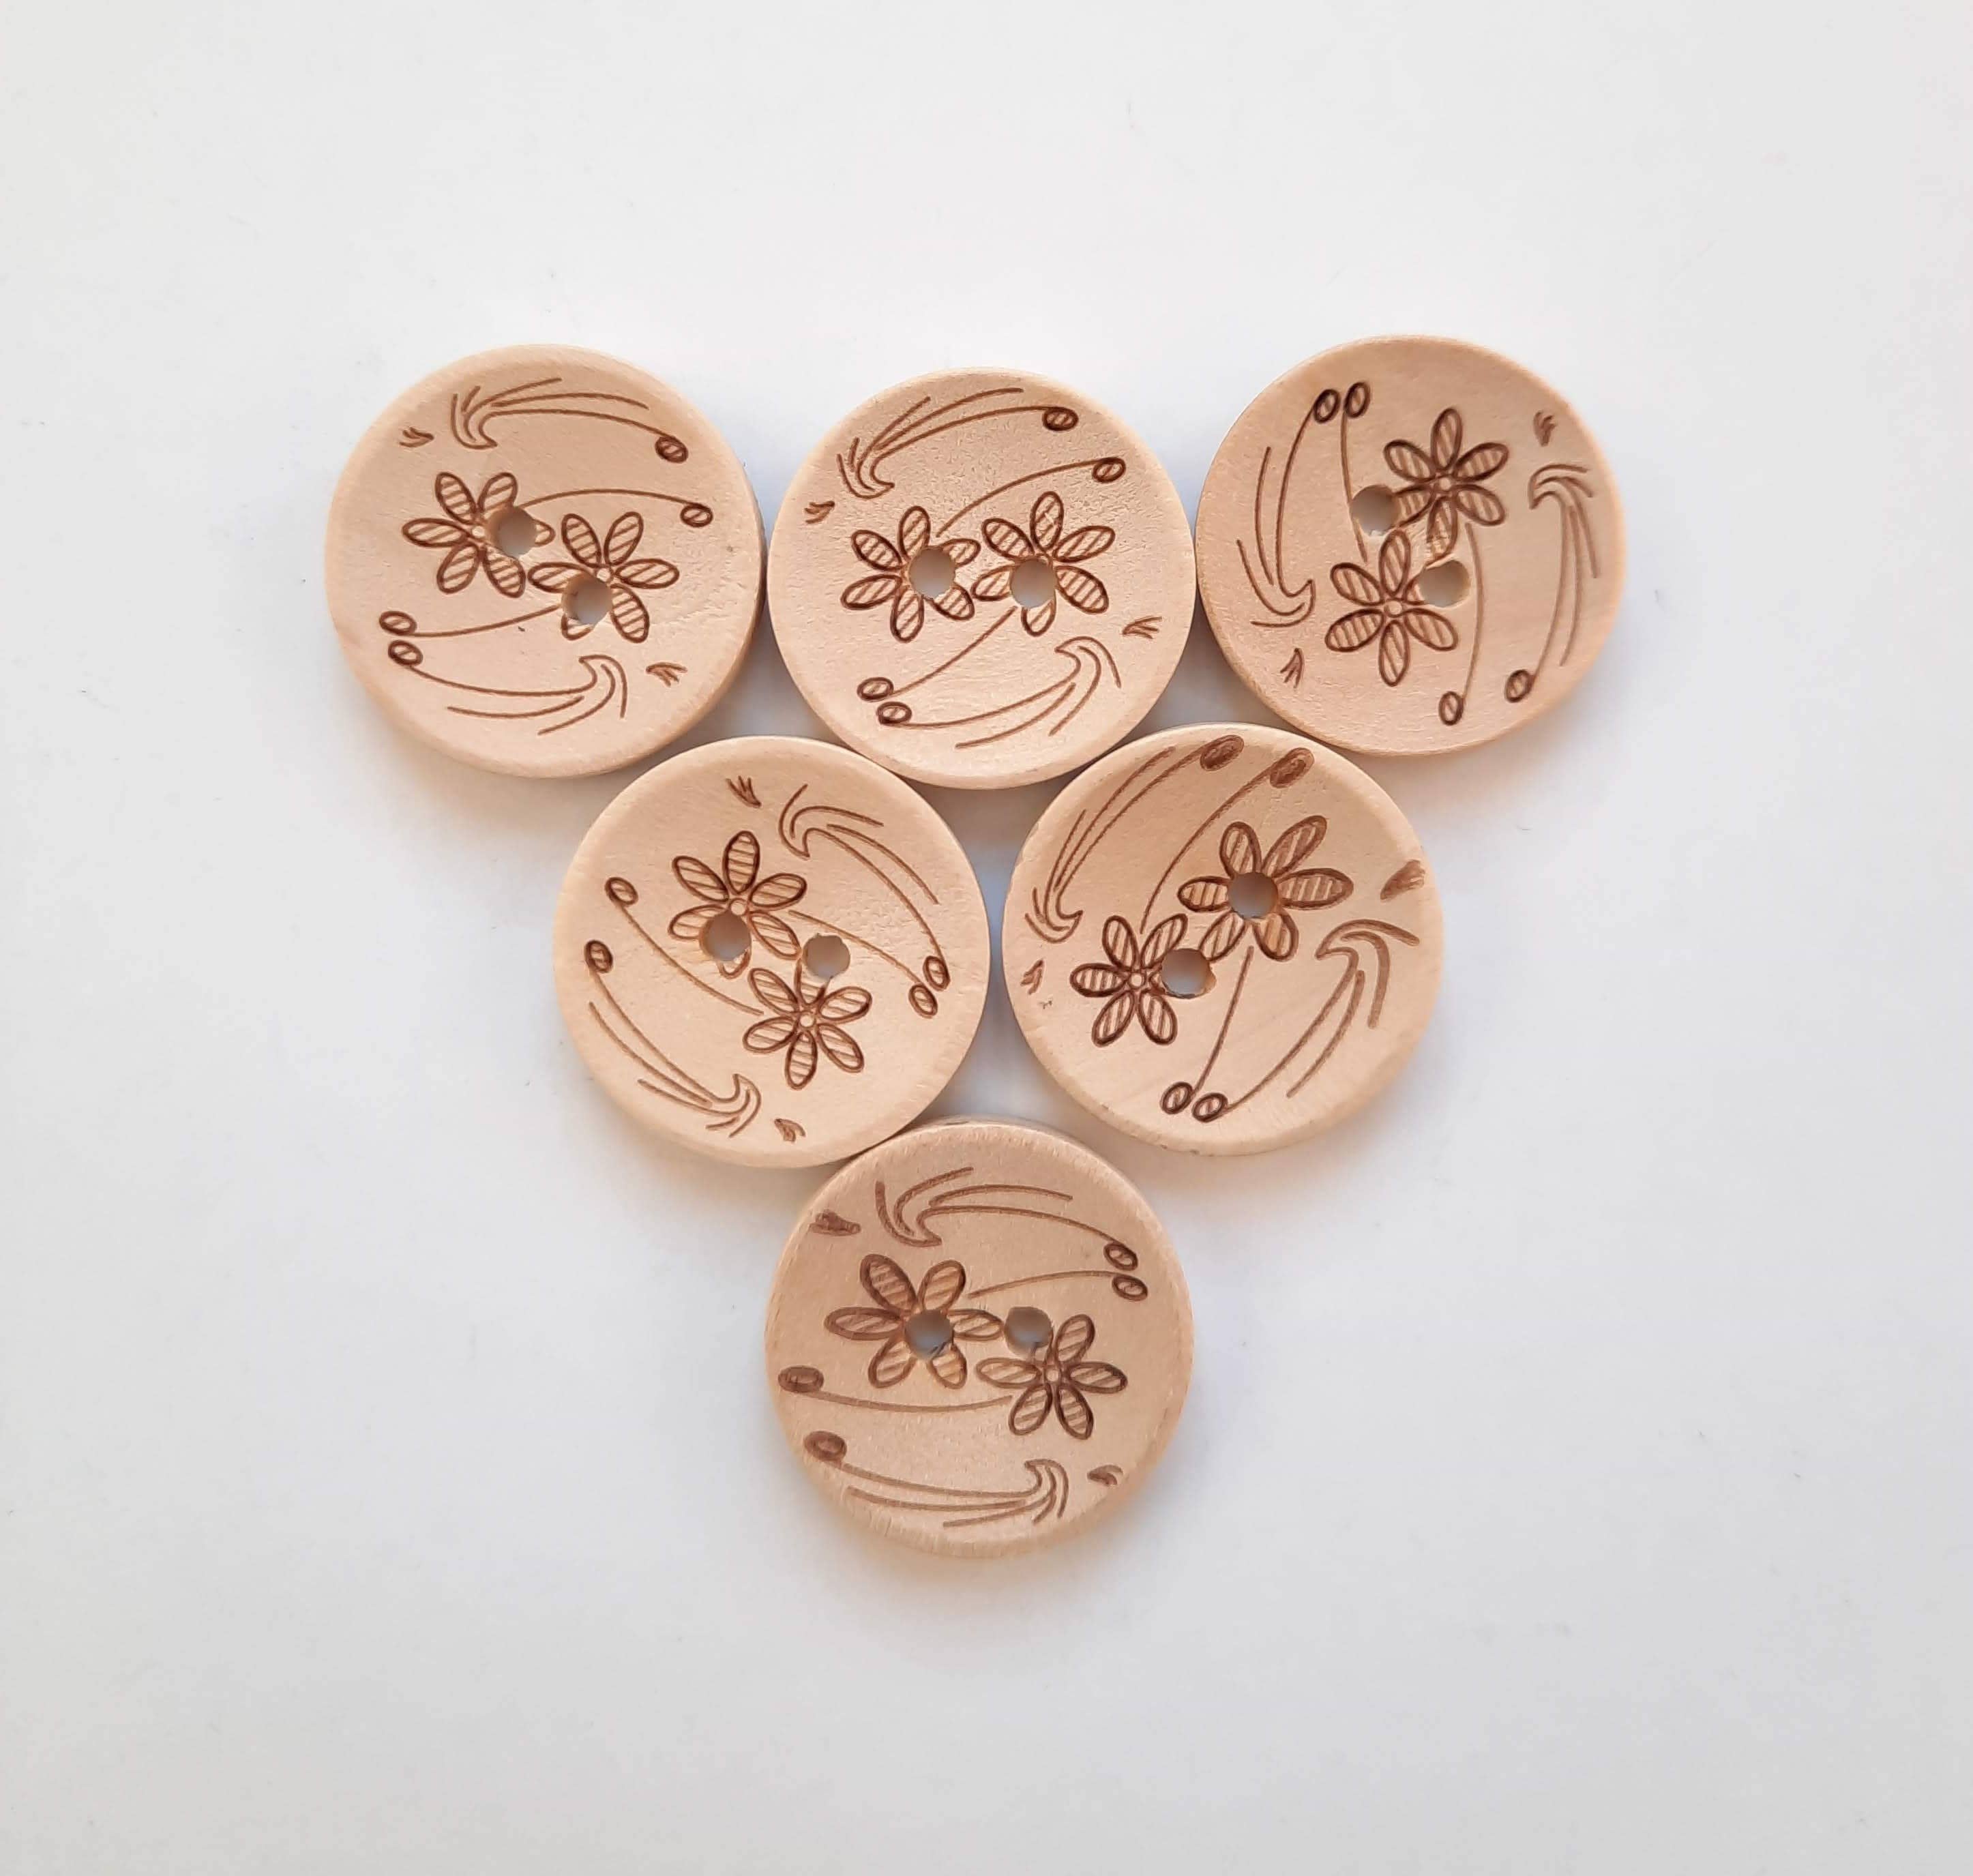 100 or 200pcs 8mm Mini Wooden Buttons for Crafts Sewing Accessories  Clothing Supplies Home Decor 4 Holes